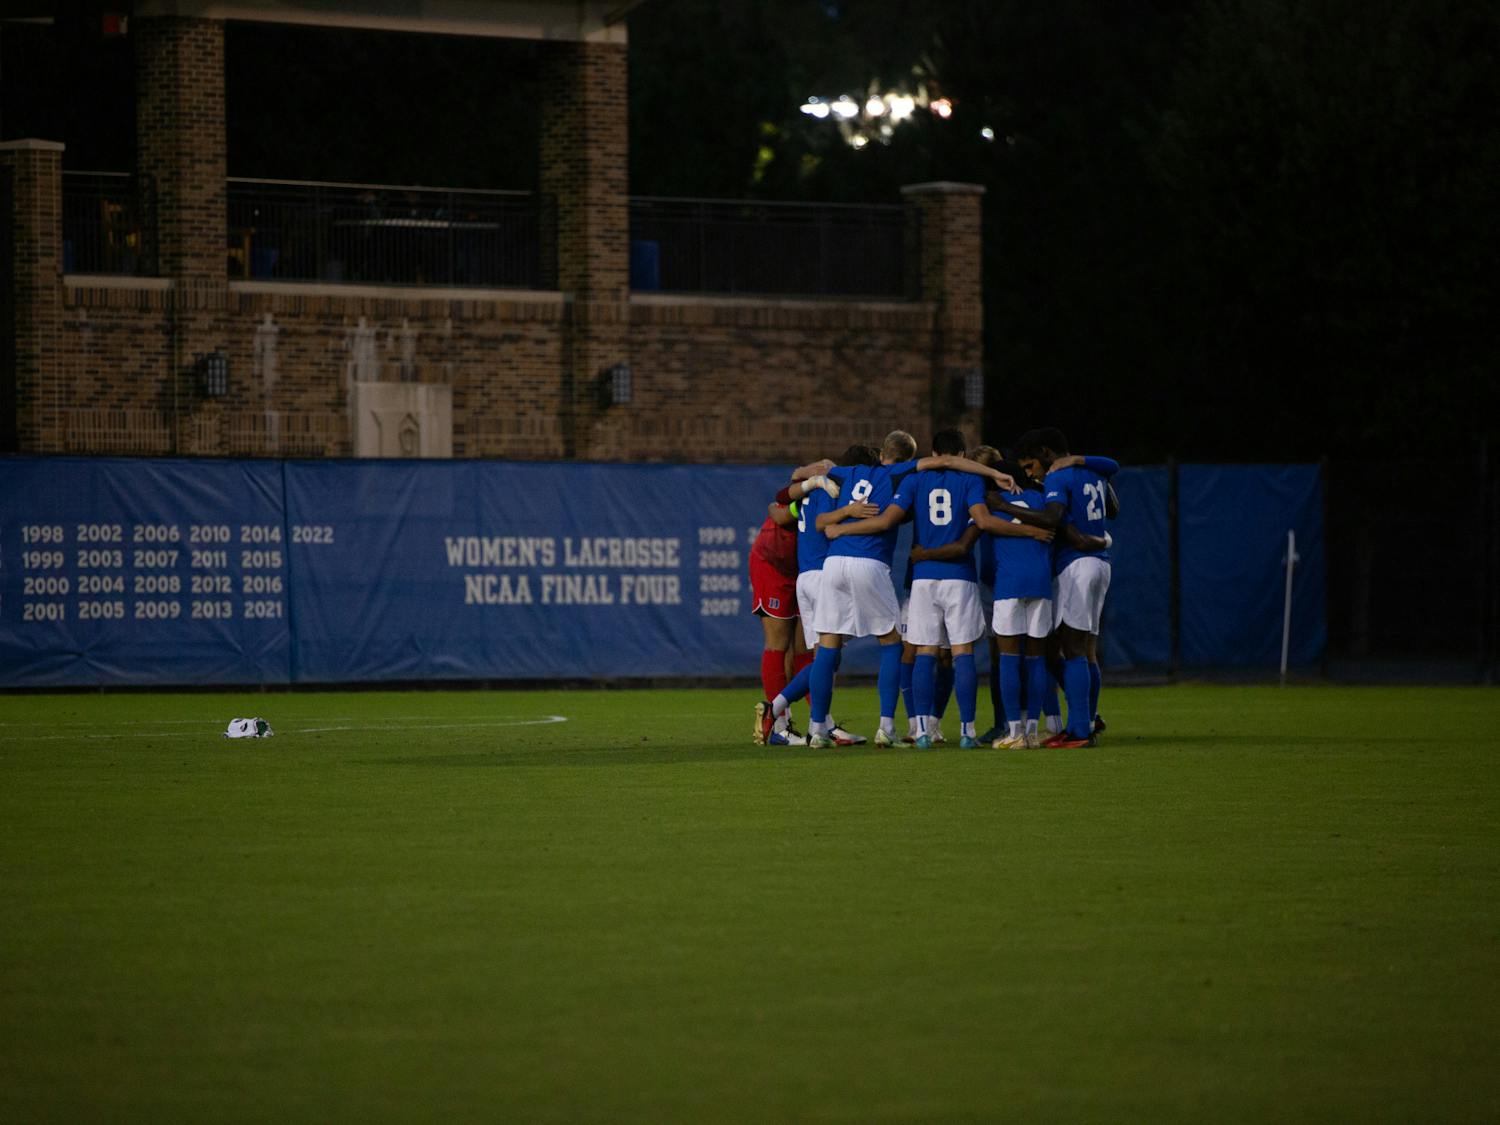 No. 21 Duke men's soccer won twice this week, one against College of Charleston and a big win against No. 7 Syracuse.